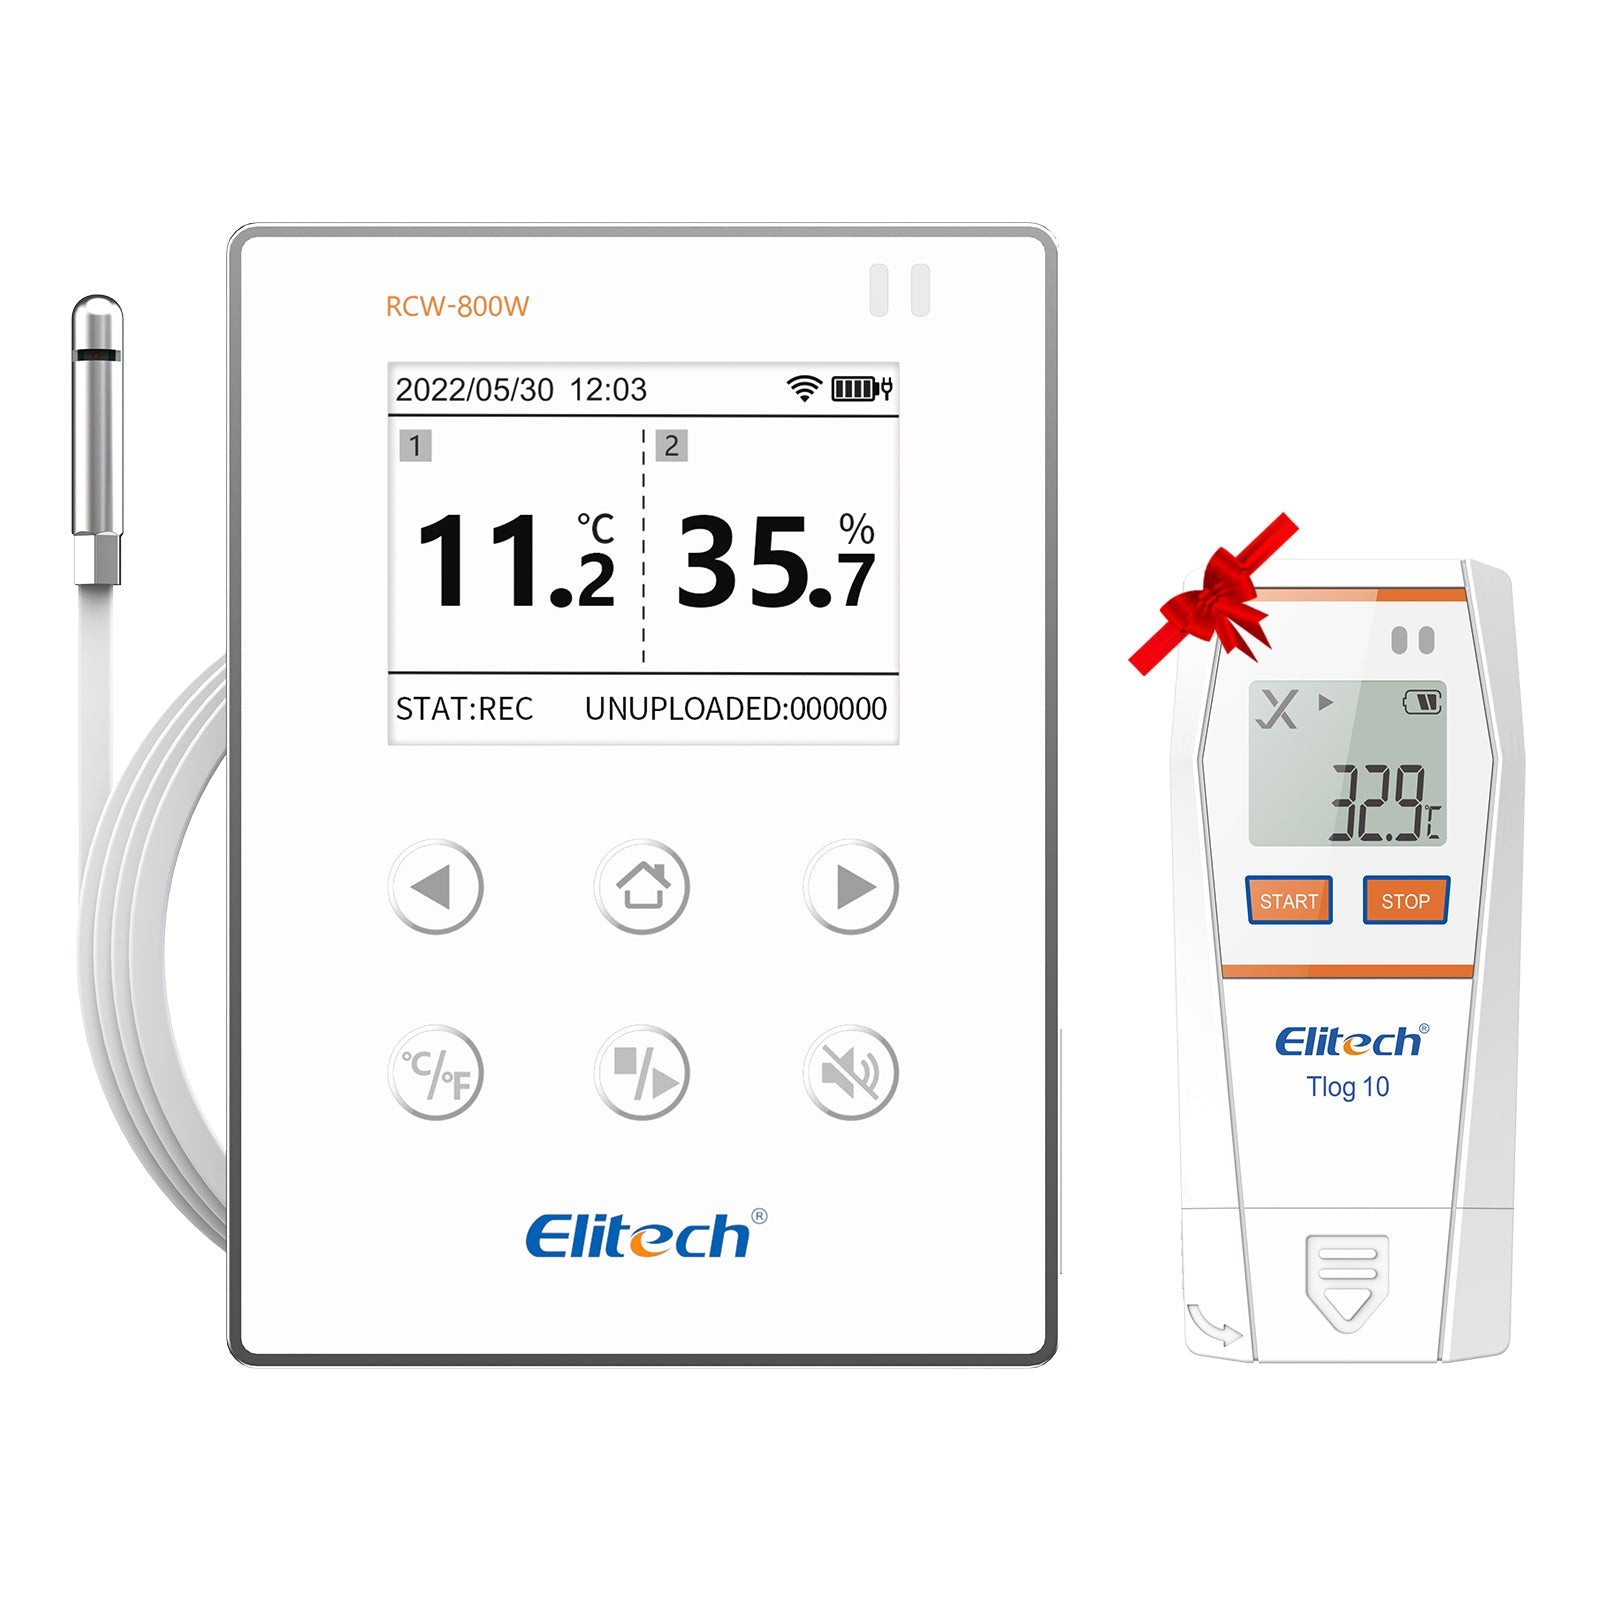 Elitech Temperature Humidity Data Logger WiFi Recorder Cloud Storage Wirelesss Remote Monitor, RCW-800W-THE - Elitech Technology, Inc.